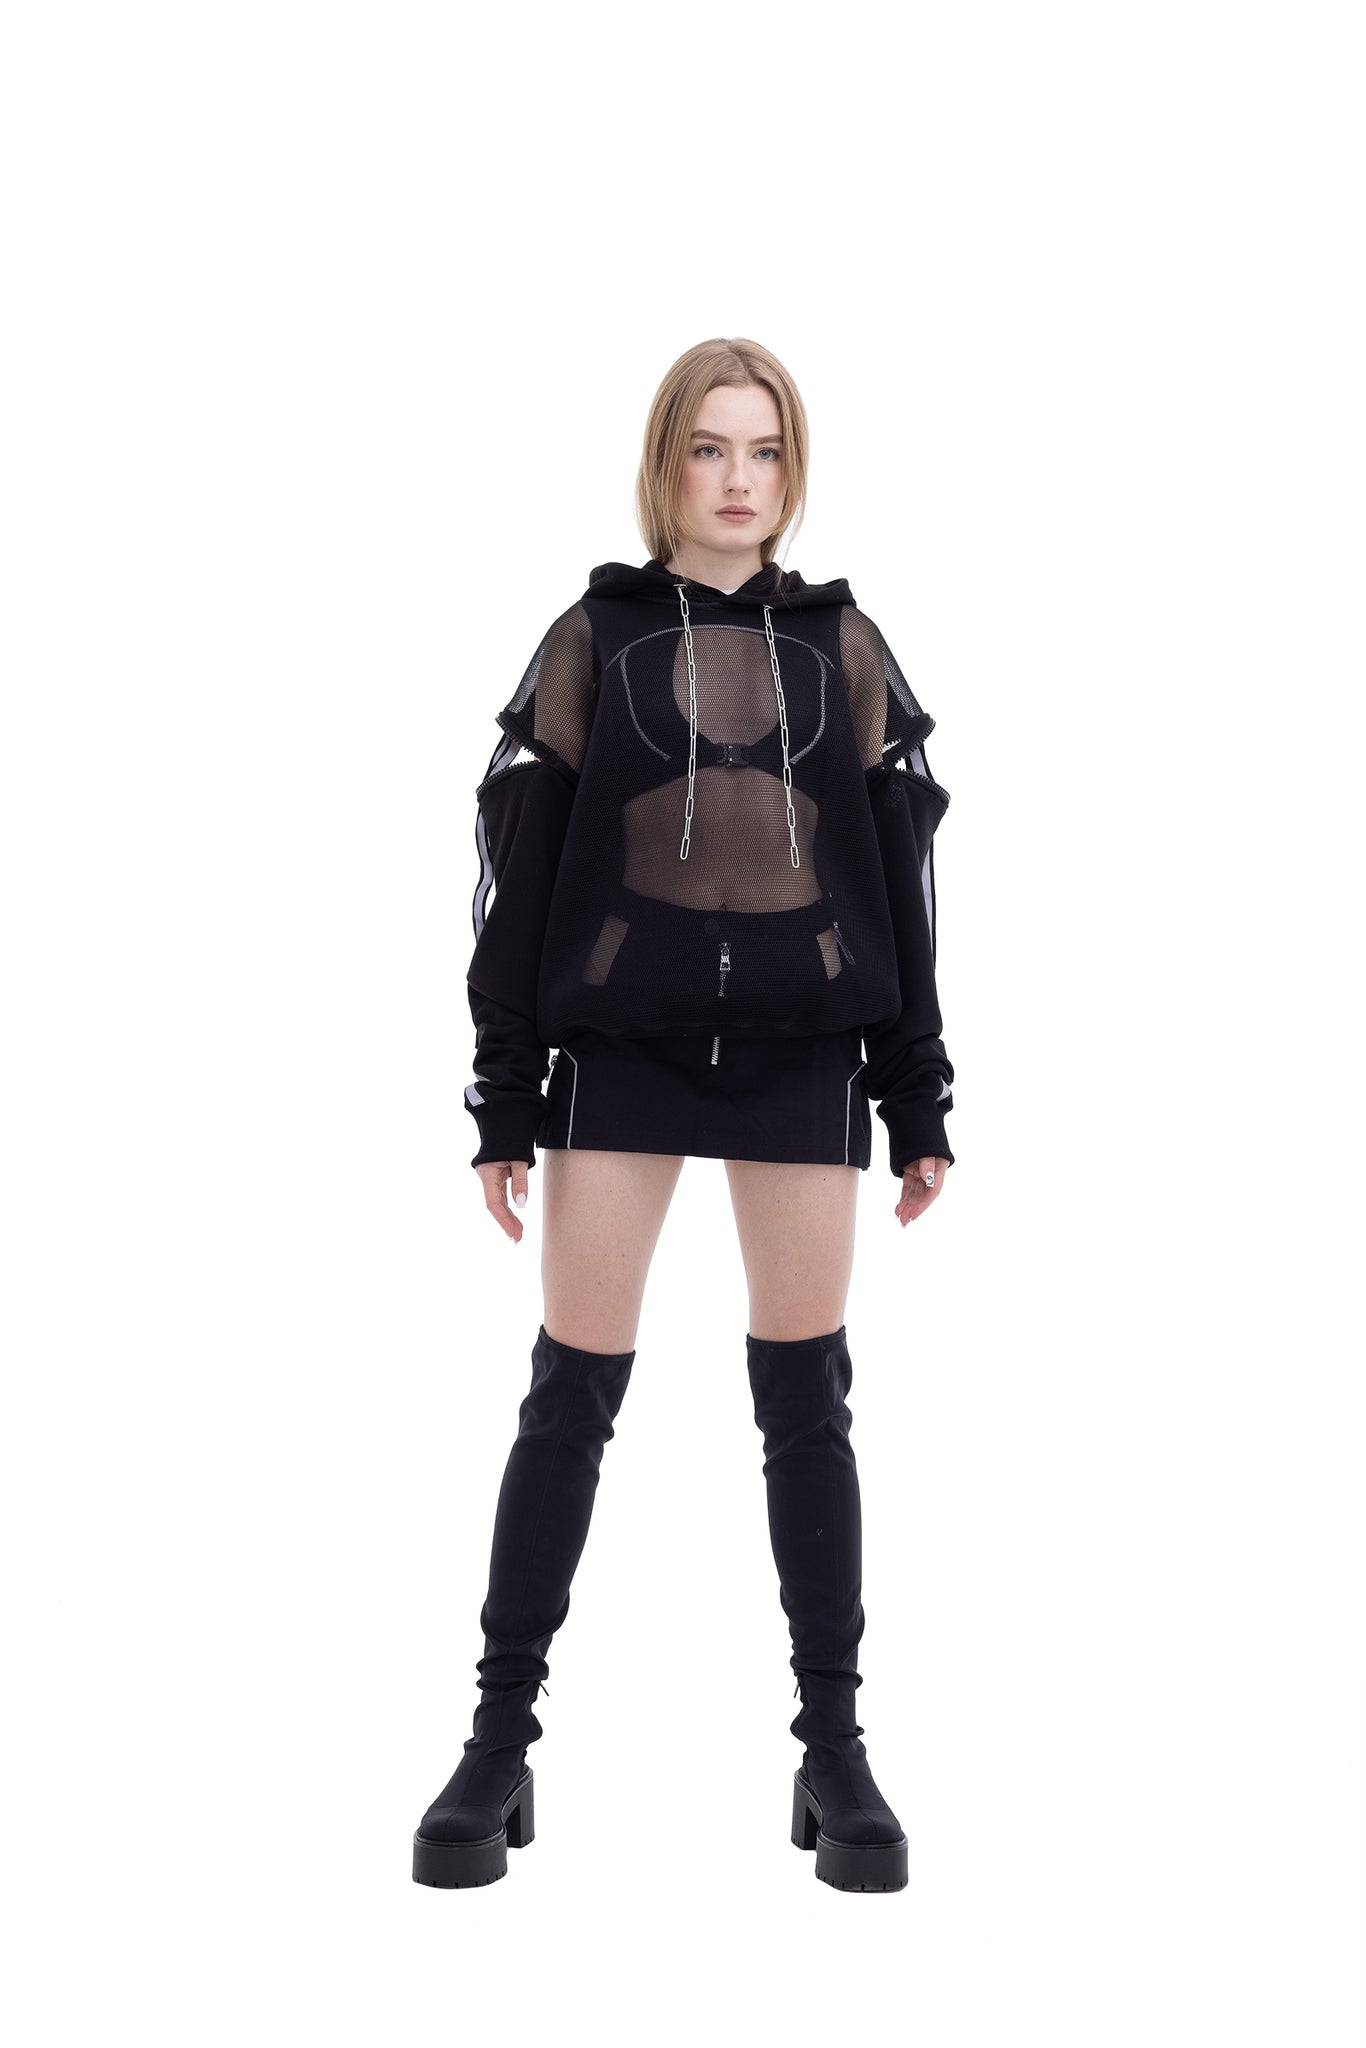 Mesh Unisex Hoodie with reflective details